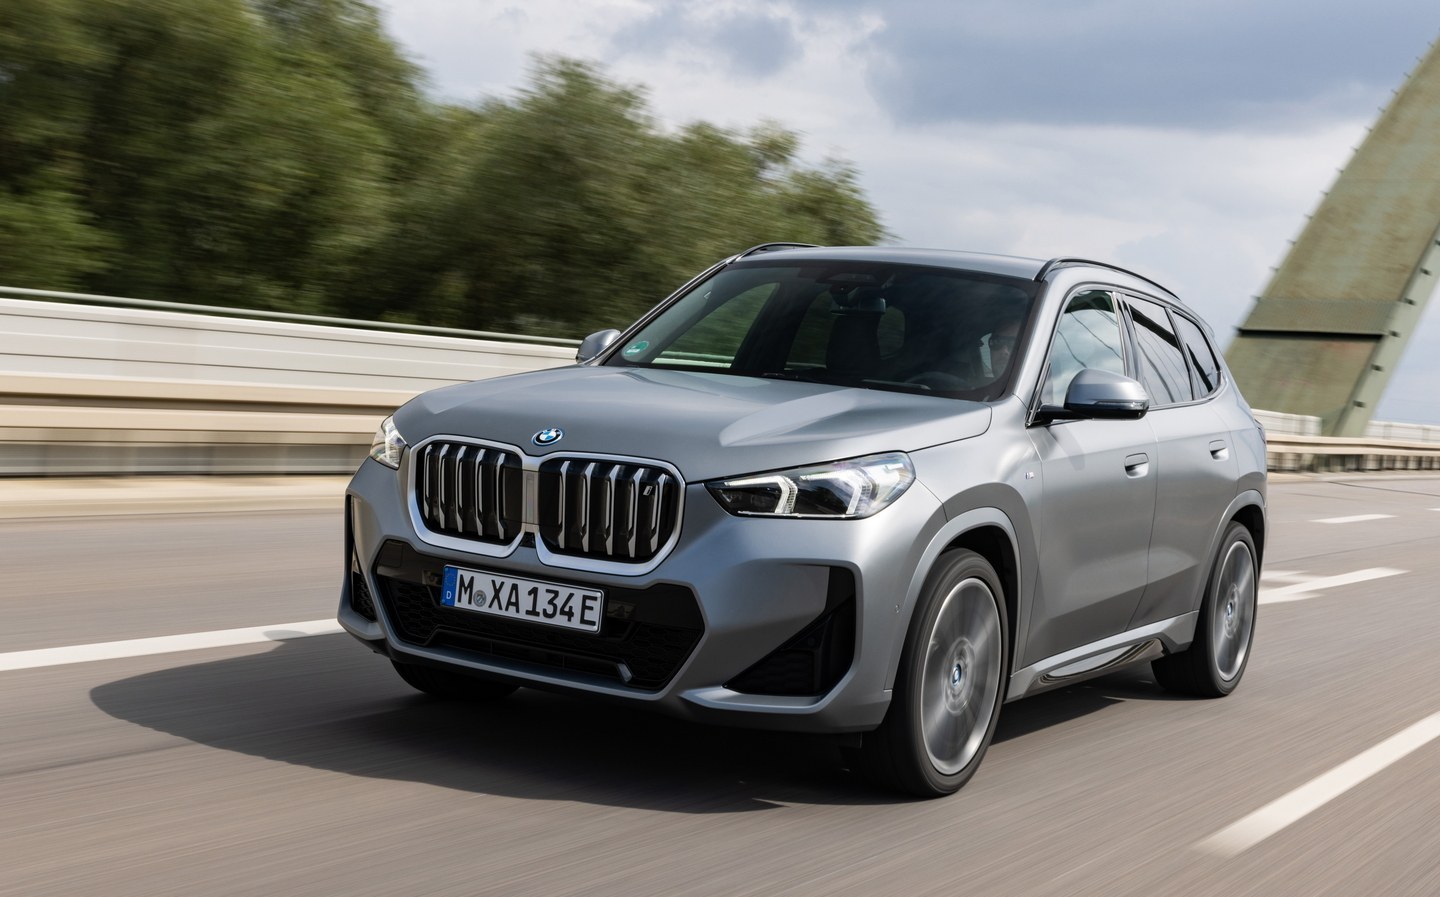 BMW X1 and iX1 2023 review: compact crossover now comes as an